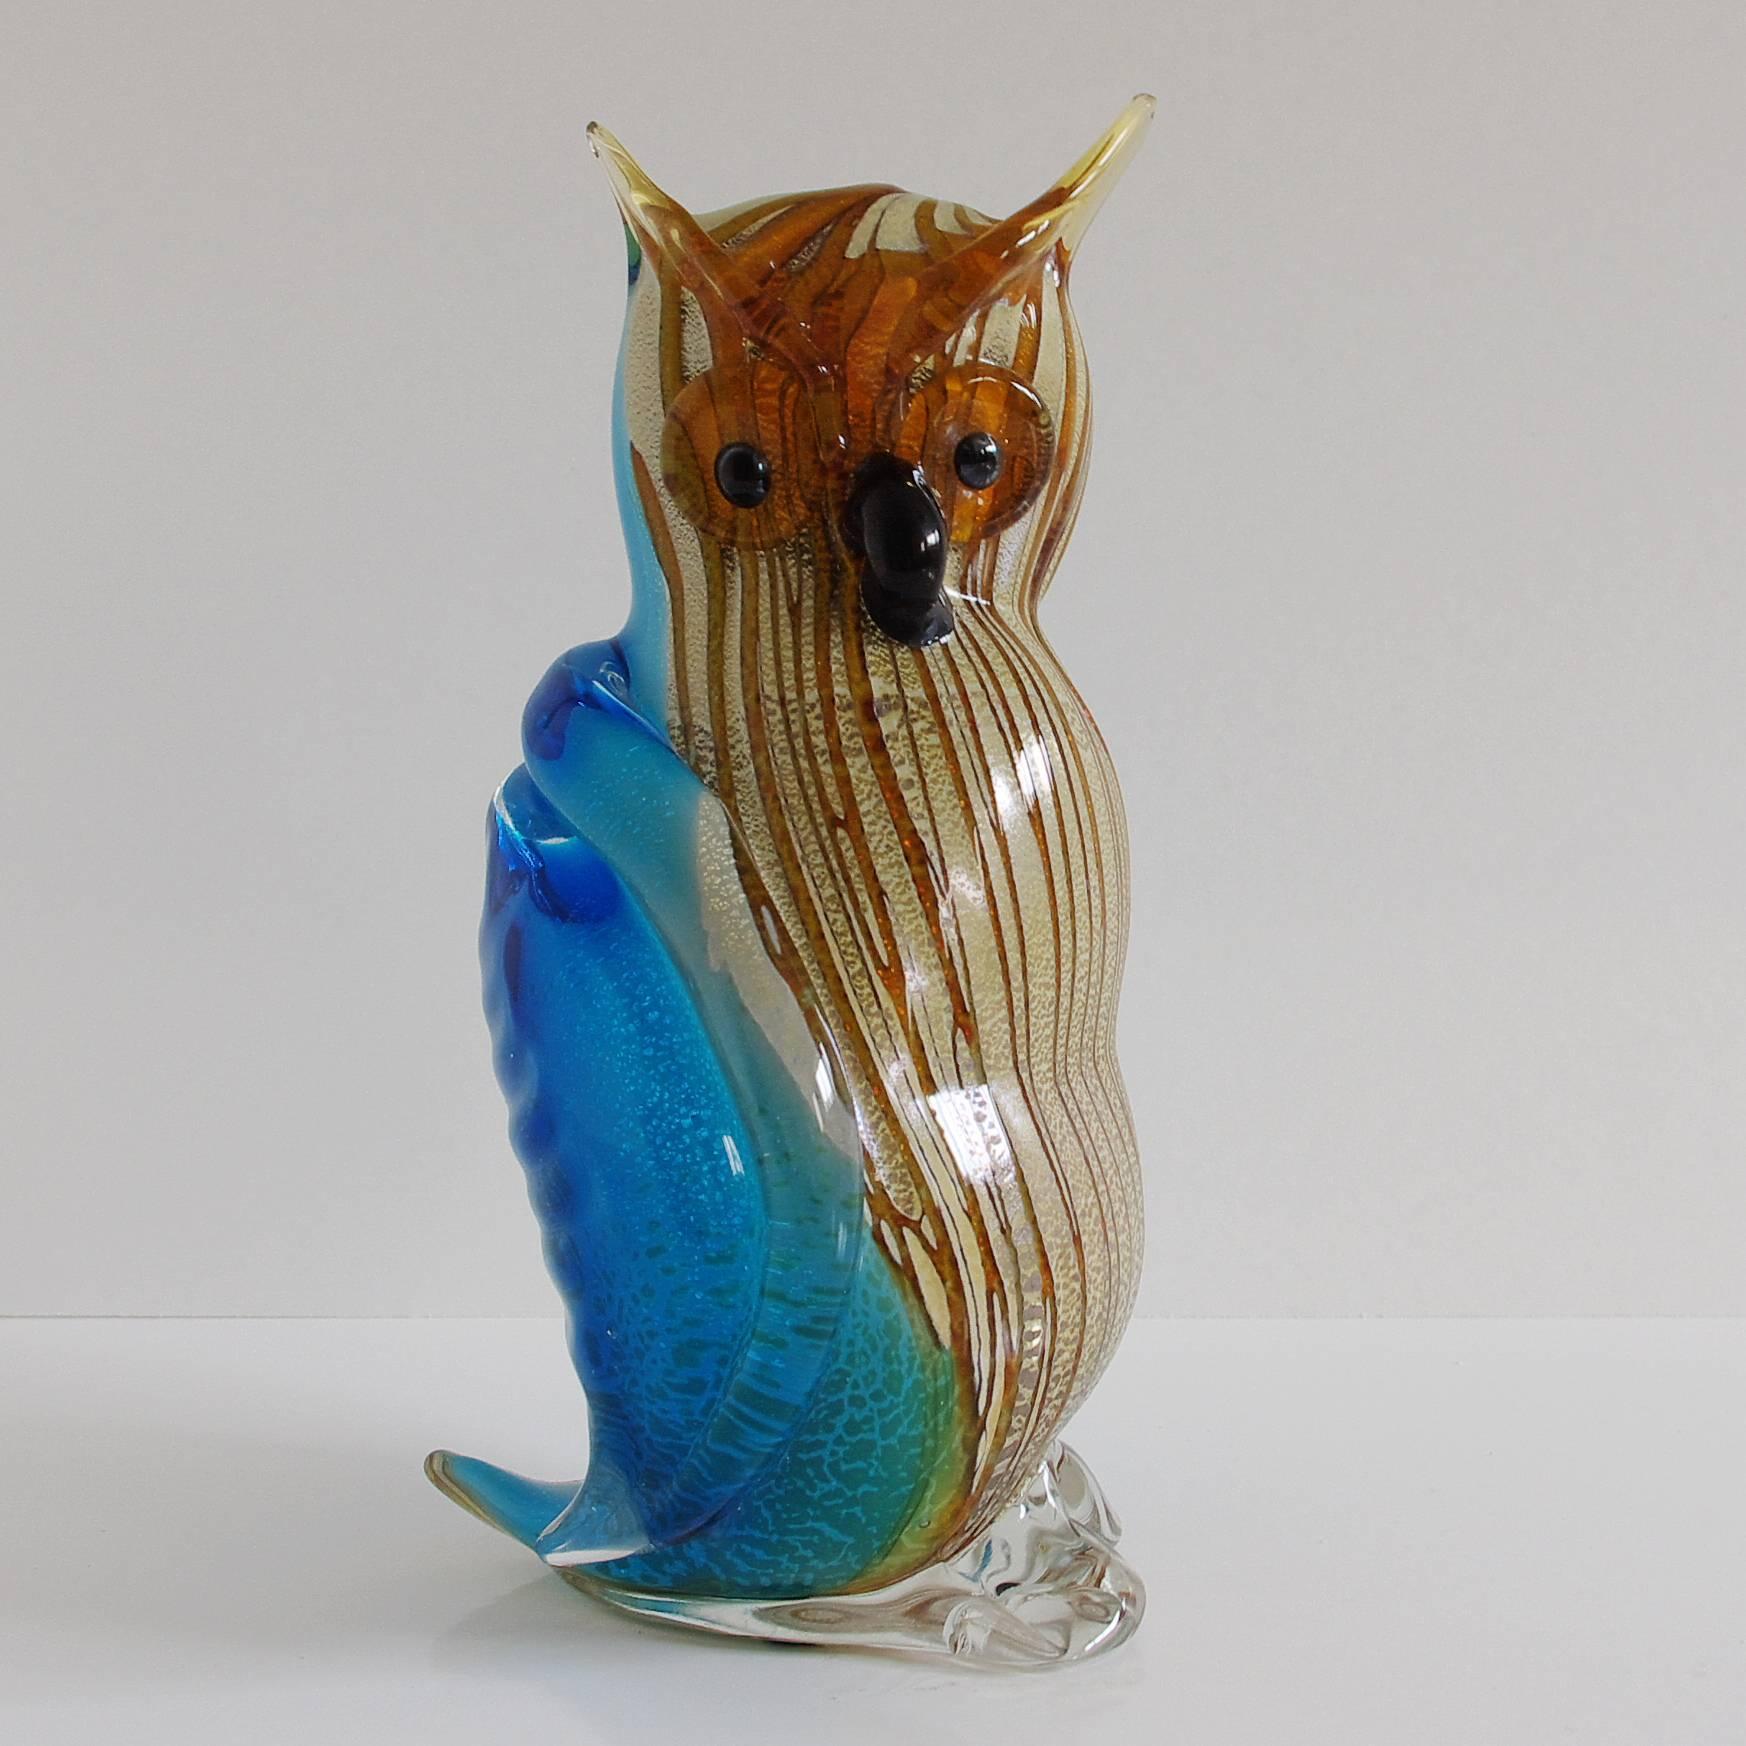 One of a kind caramel and blue Murano glass owl by Sergio Costantini. Signed on the base. Made in Italy in the 1960s.
Depth: 5.5 inches / Width: 5 inches / Height: 9.5 inches
1 in stock in Palm Springs.
Order Reference #: 109
